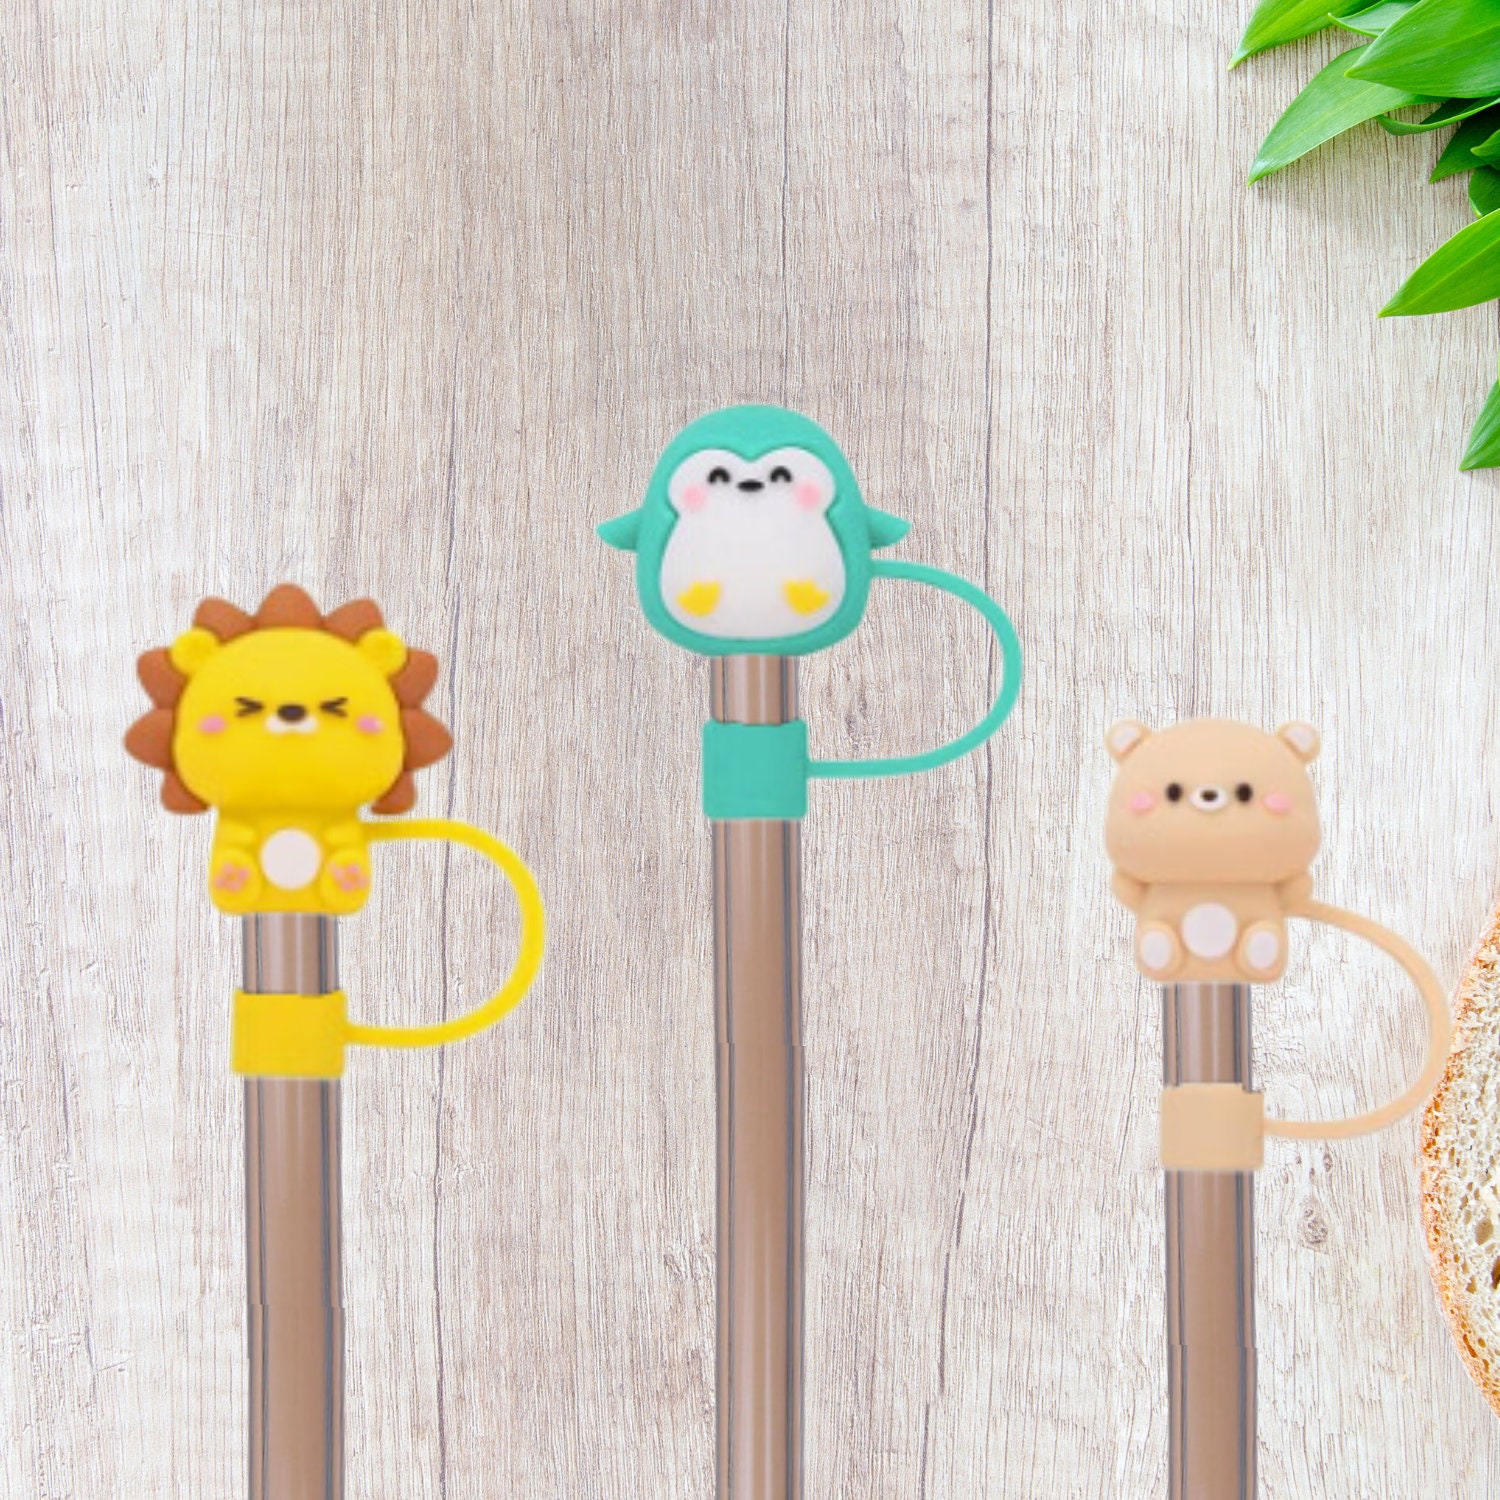  Straw Cover Cap for Stanley,Funny Miick Cartoon Straw